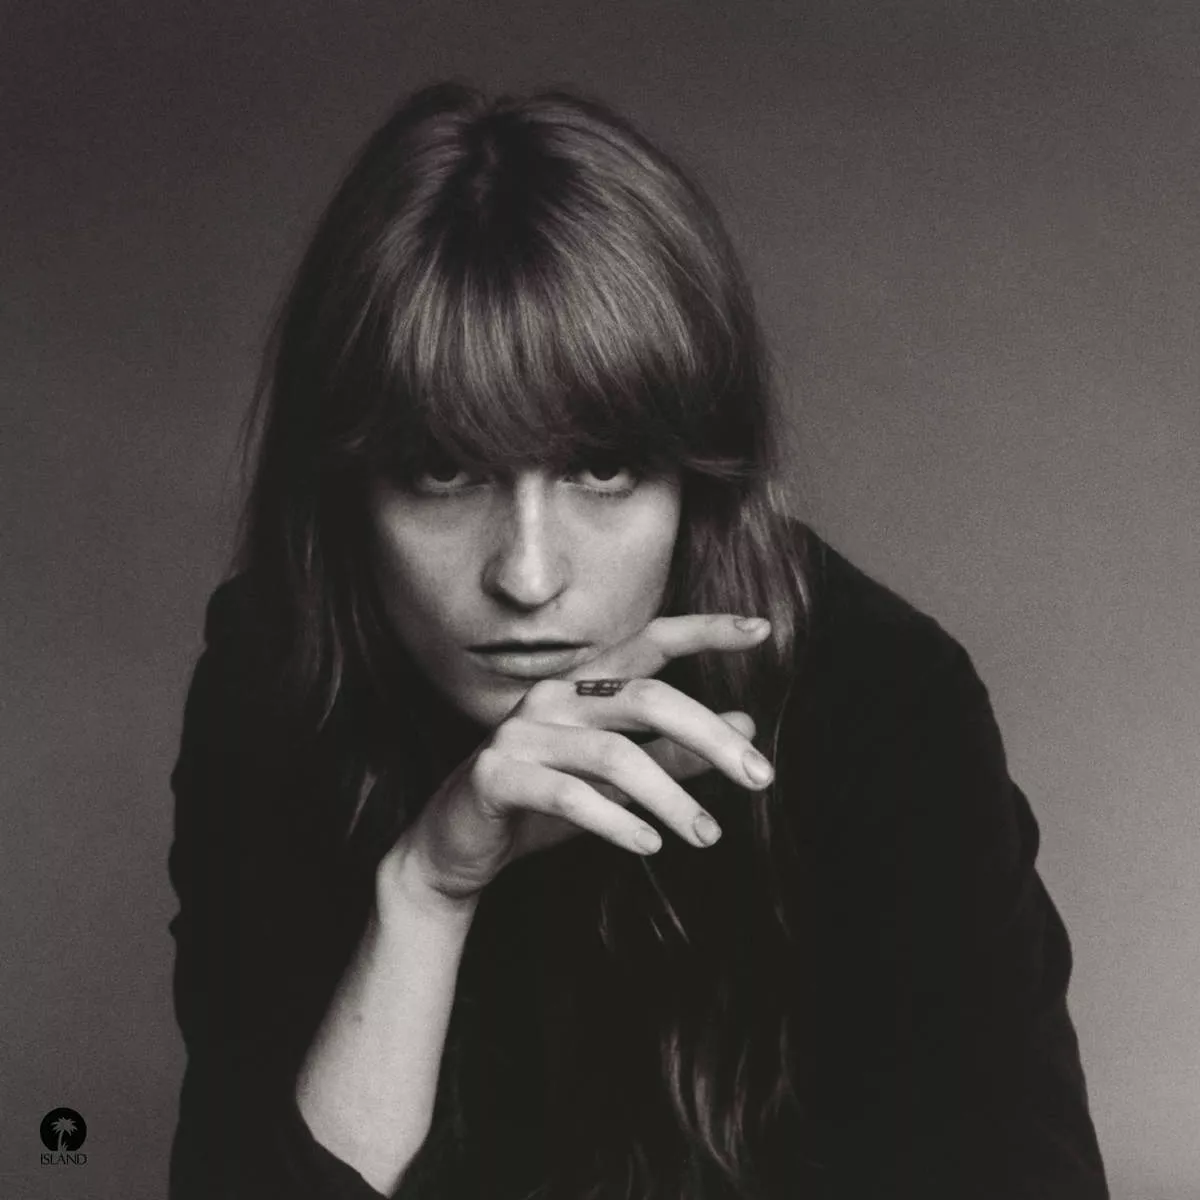 How Big, How Blue, How Beautiful - Florence And The Machine